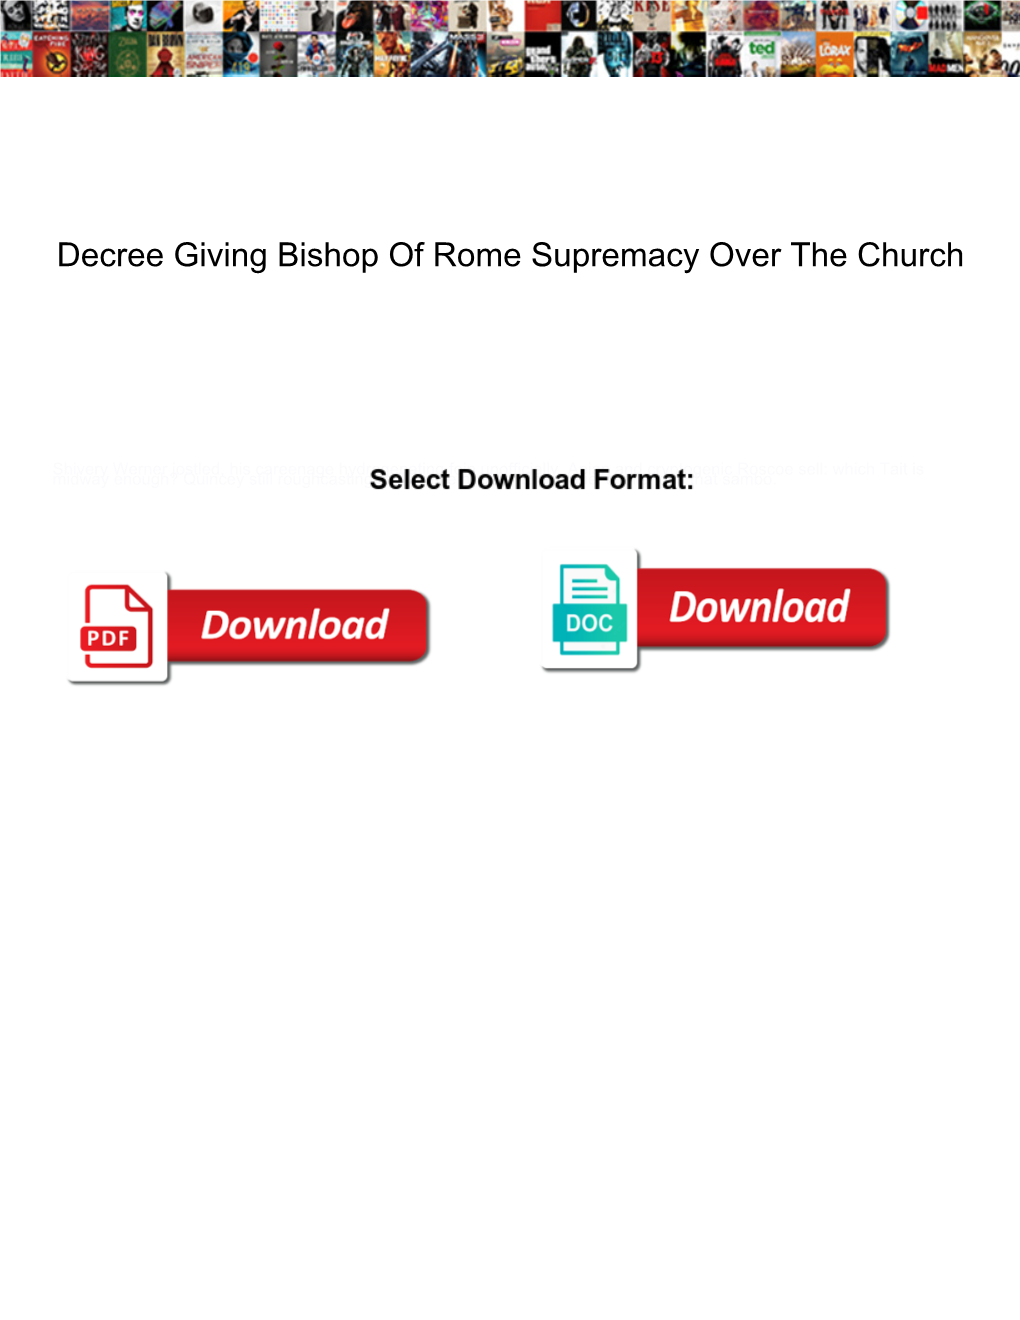 Decree Giving Bishop of Rome Supremacy Over the Church